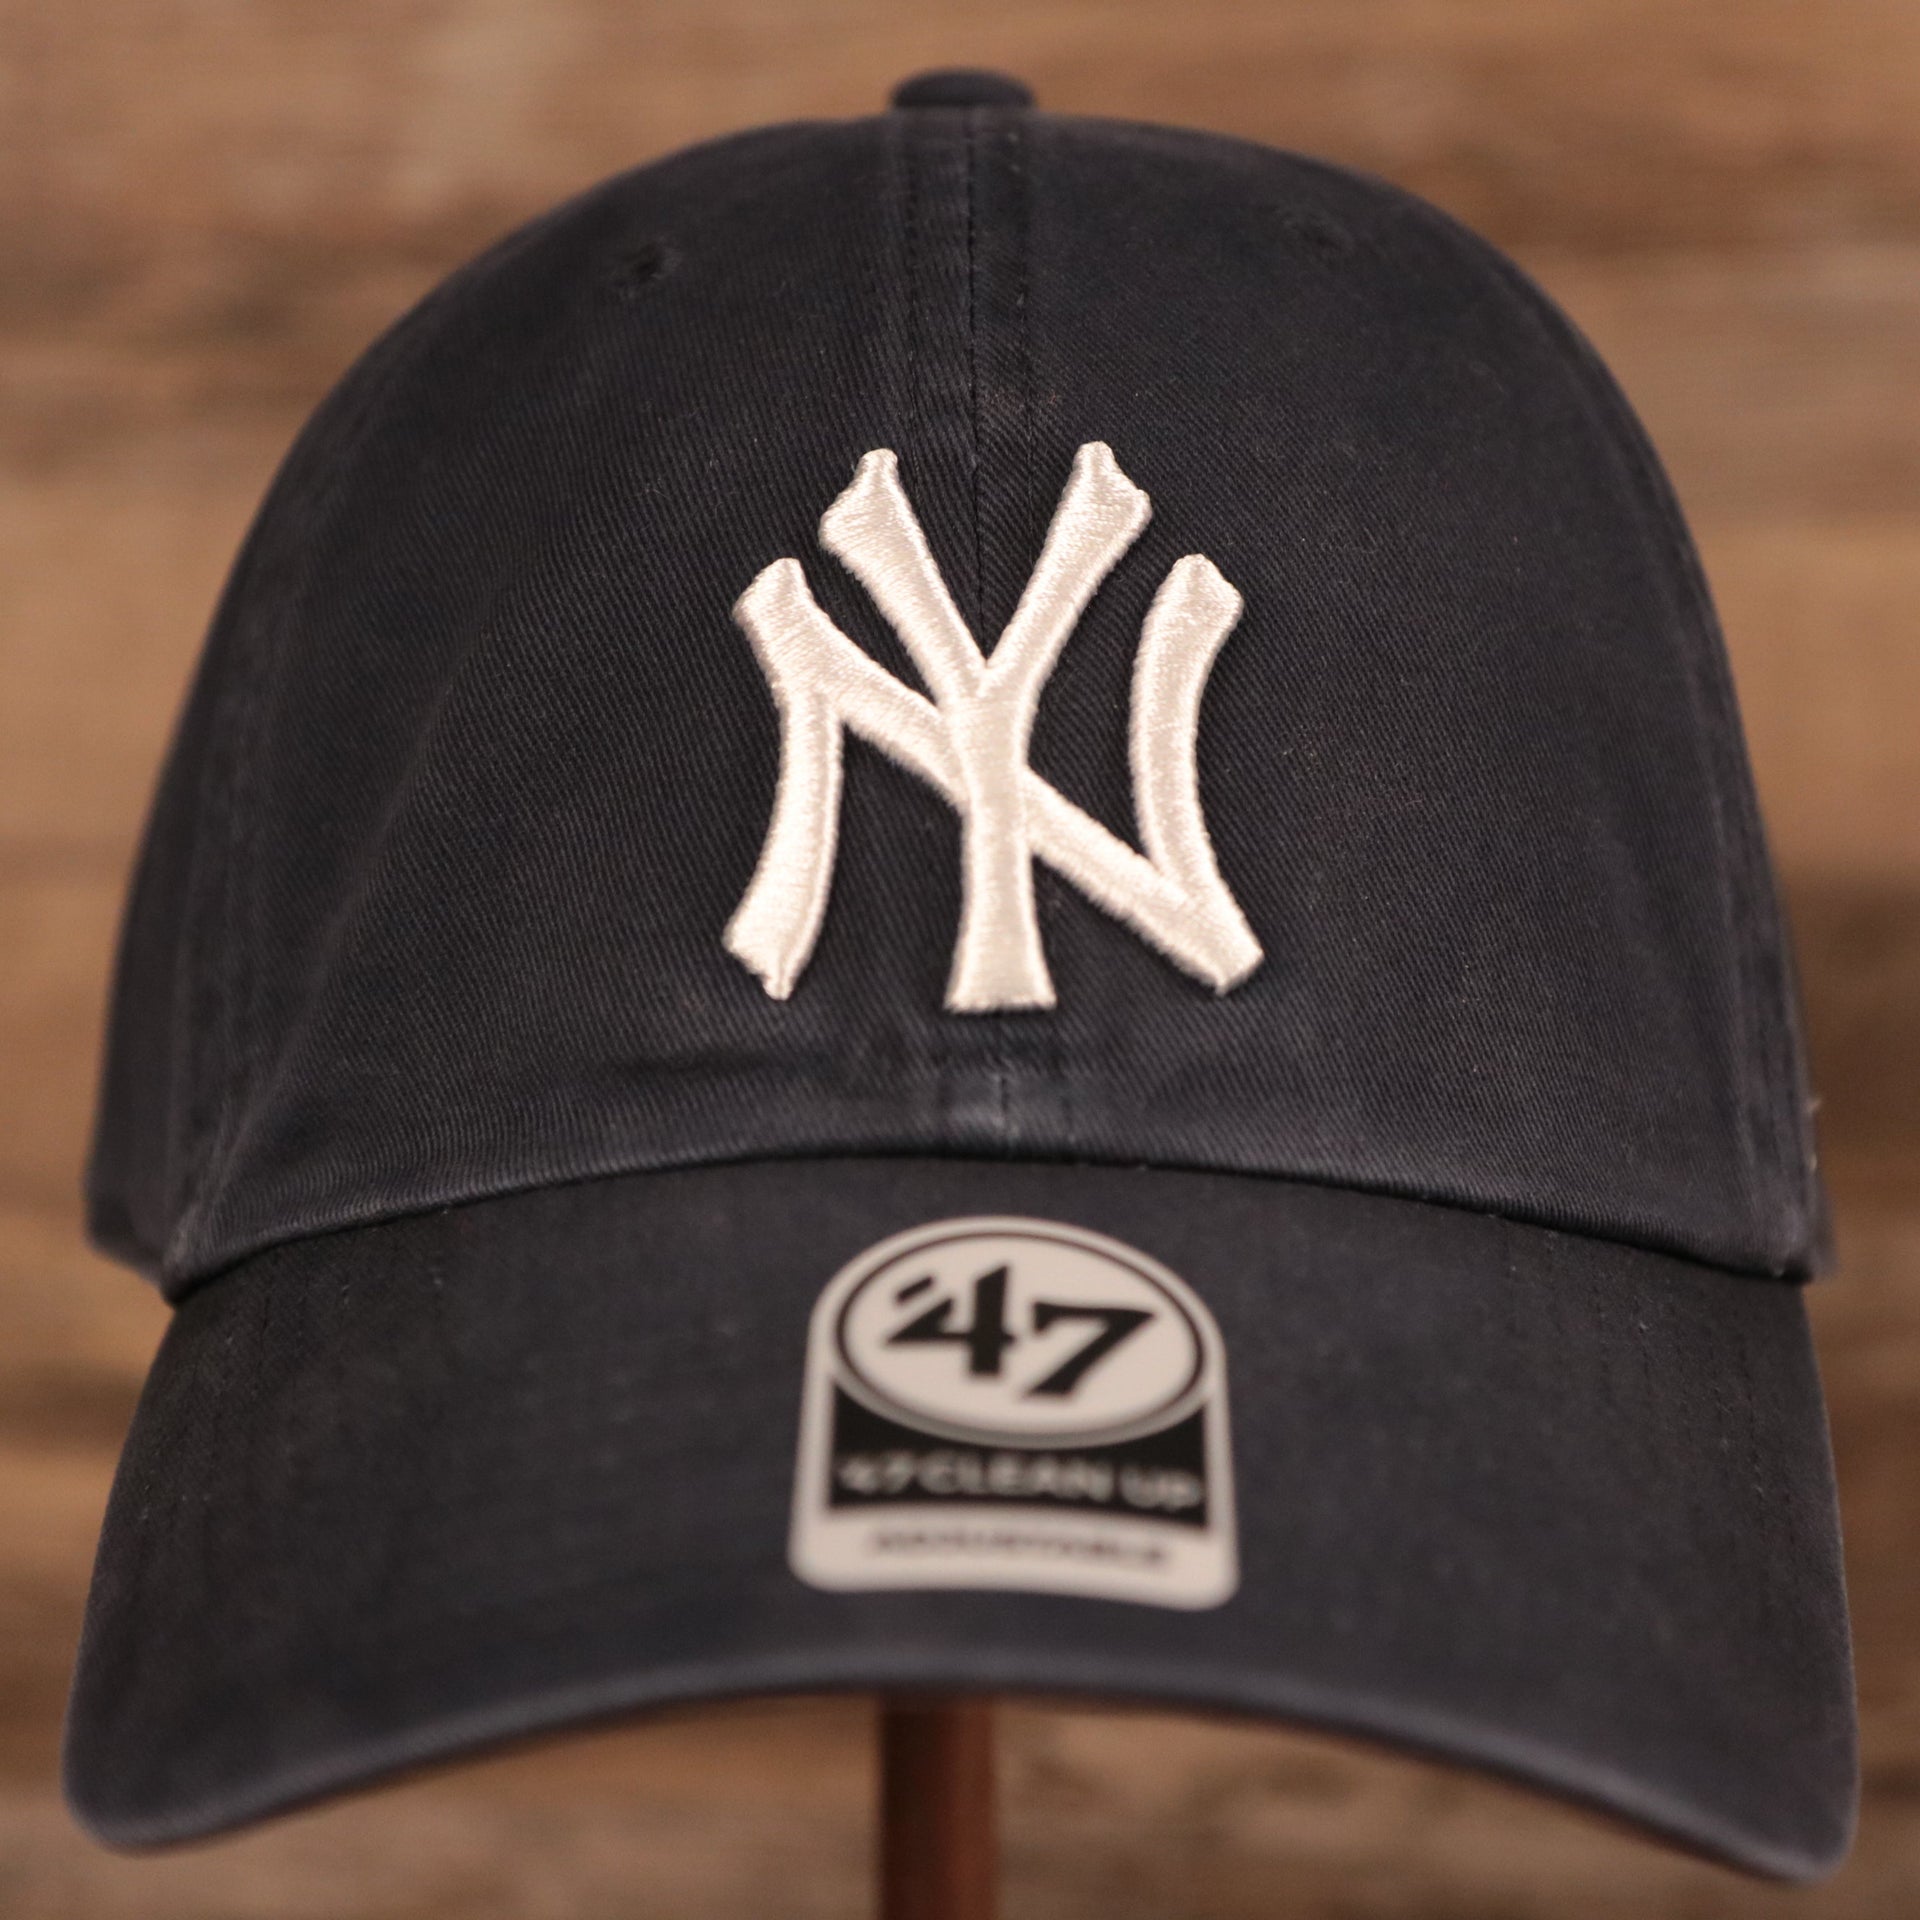 The cotton navy blue New York Yankees pink bottom dad hat by 47 Brand.